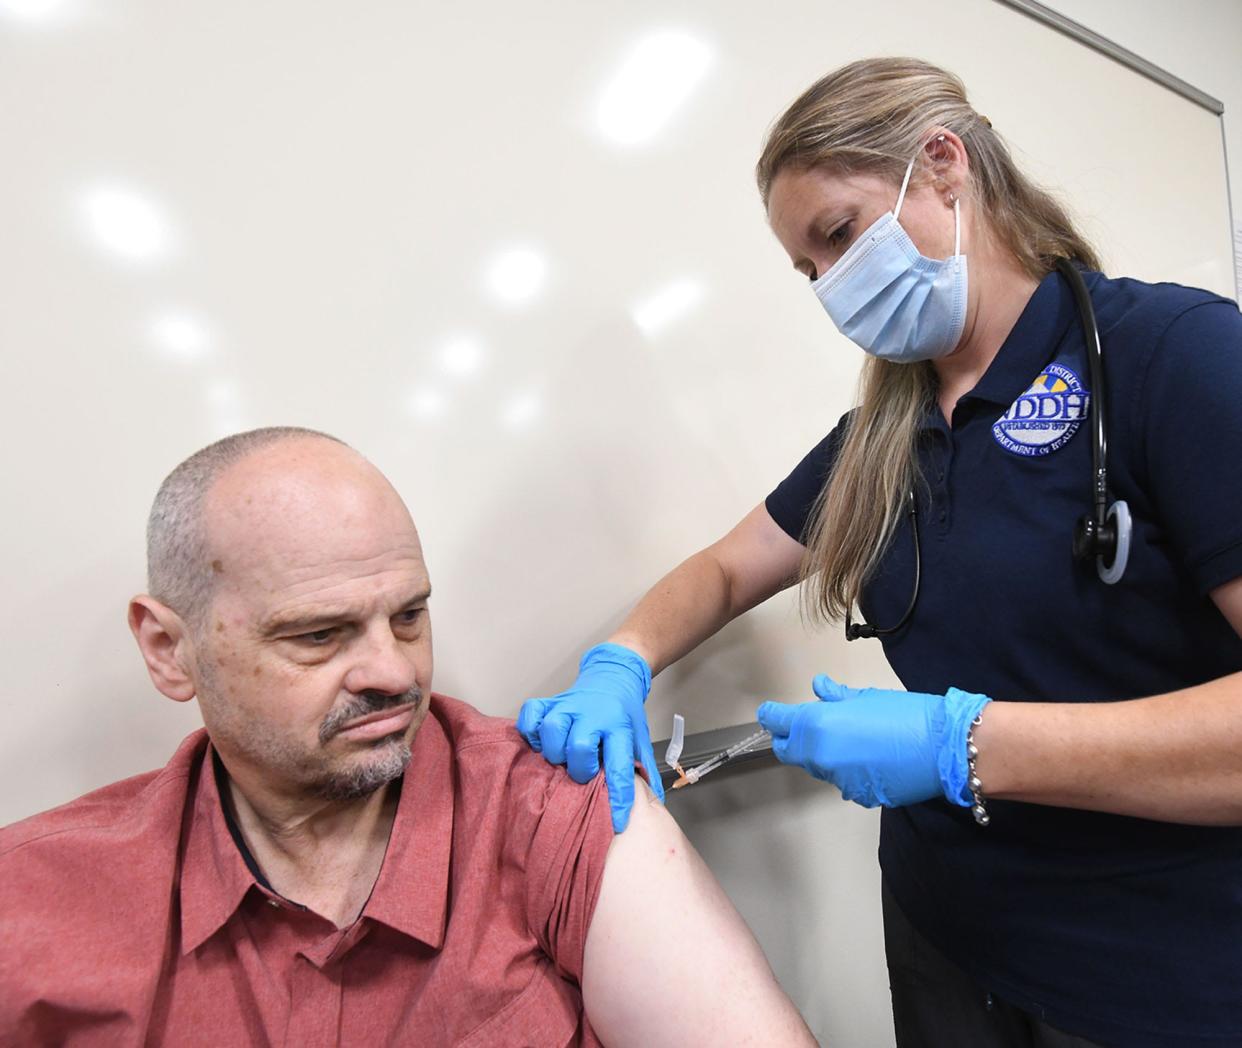 Marine veteran Neil Stanley of Dayville gets his second booster Covid-19 vaccination from public health nurse Janine Vose Saturday during a free Stand Down for veterans at Quinebaug Valley Community College in Dayville.